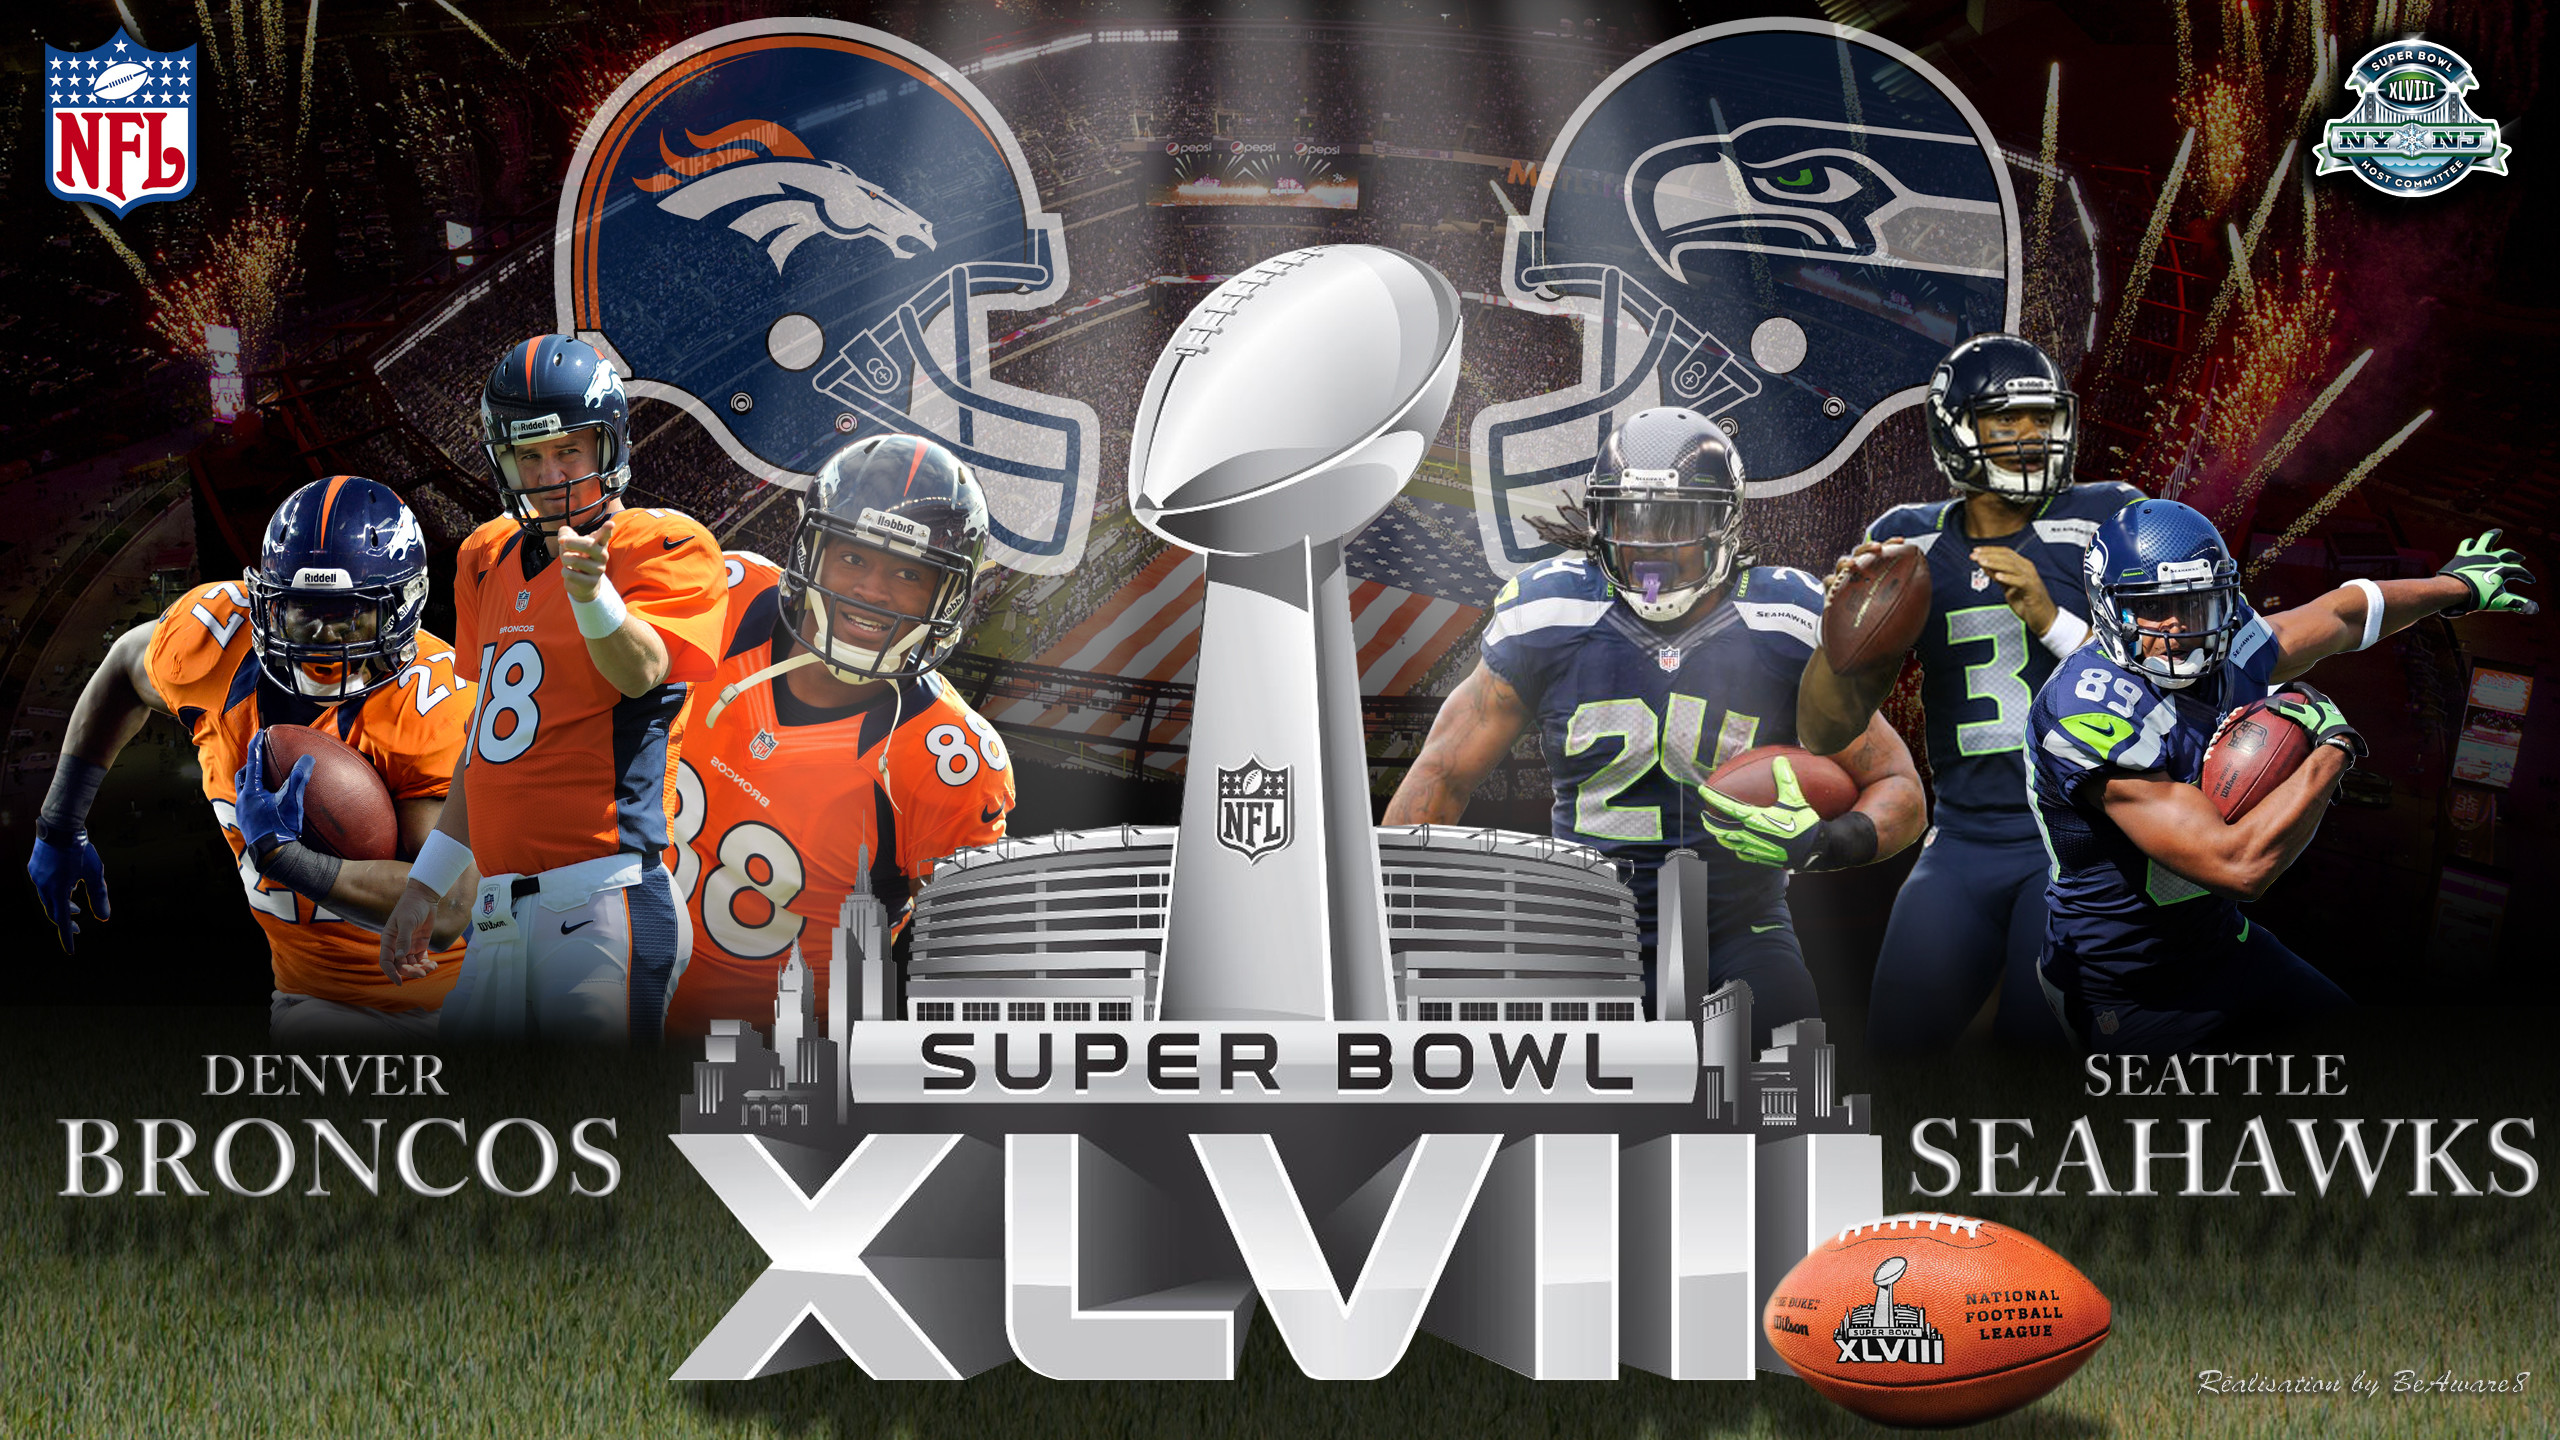 2560x1440 Super Bowl XLVIII Denver Broncos Vs Seattle Seahaw by BeAware8 on .